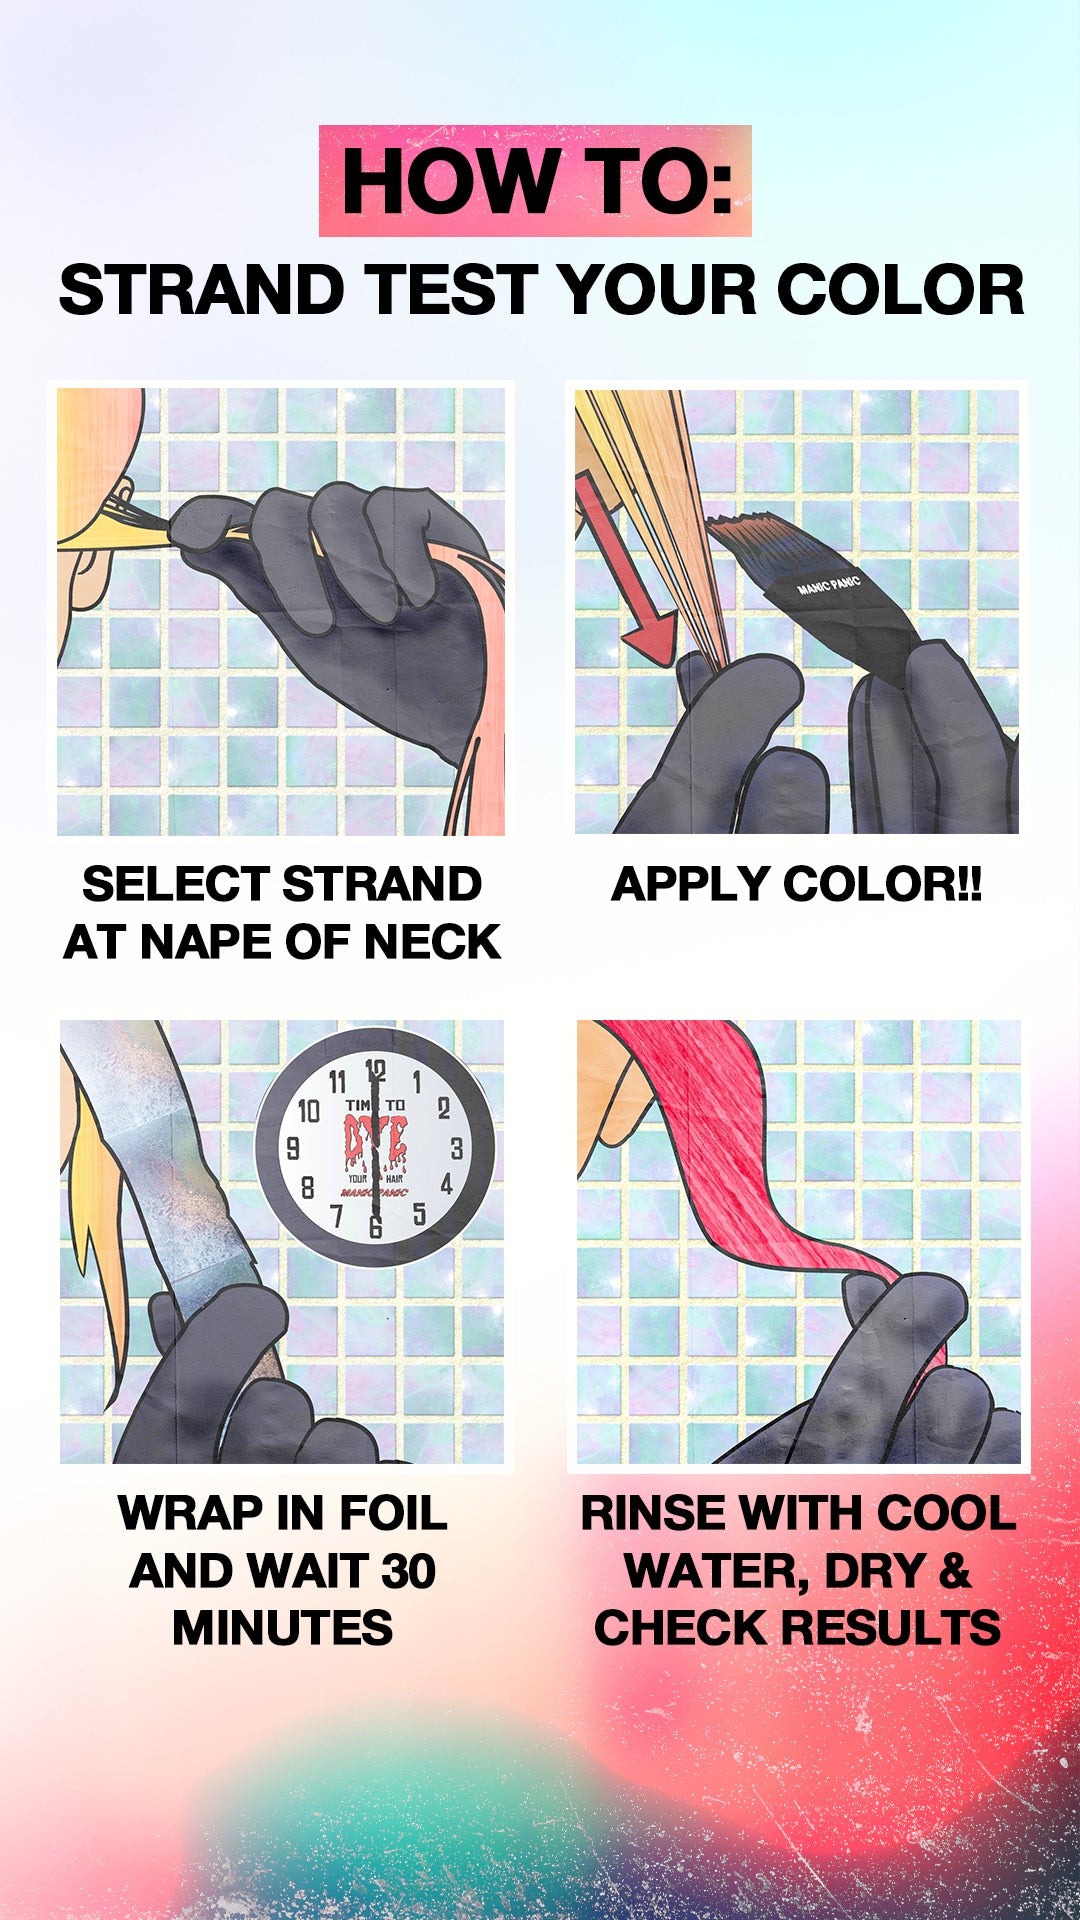 How to perform a strand Test - Tish & Snooky's Manic Panic